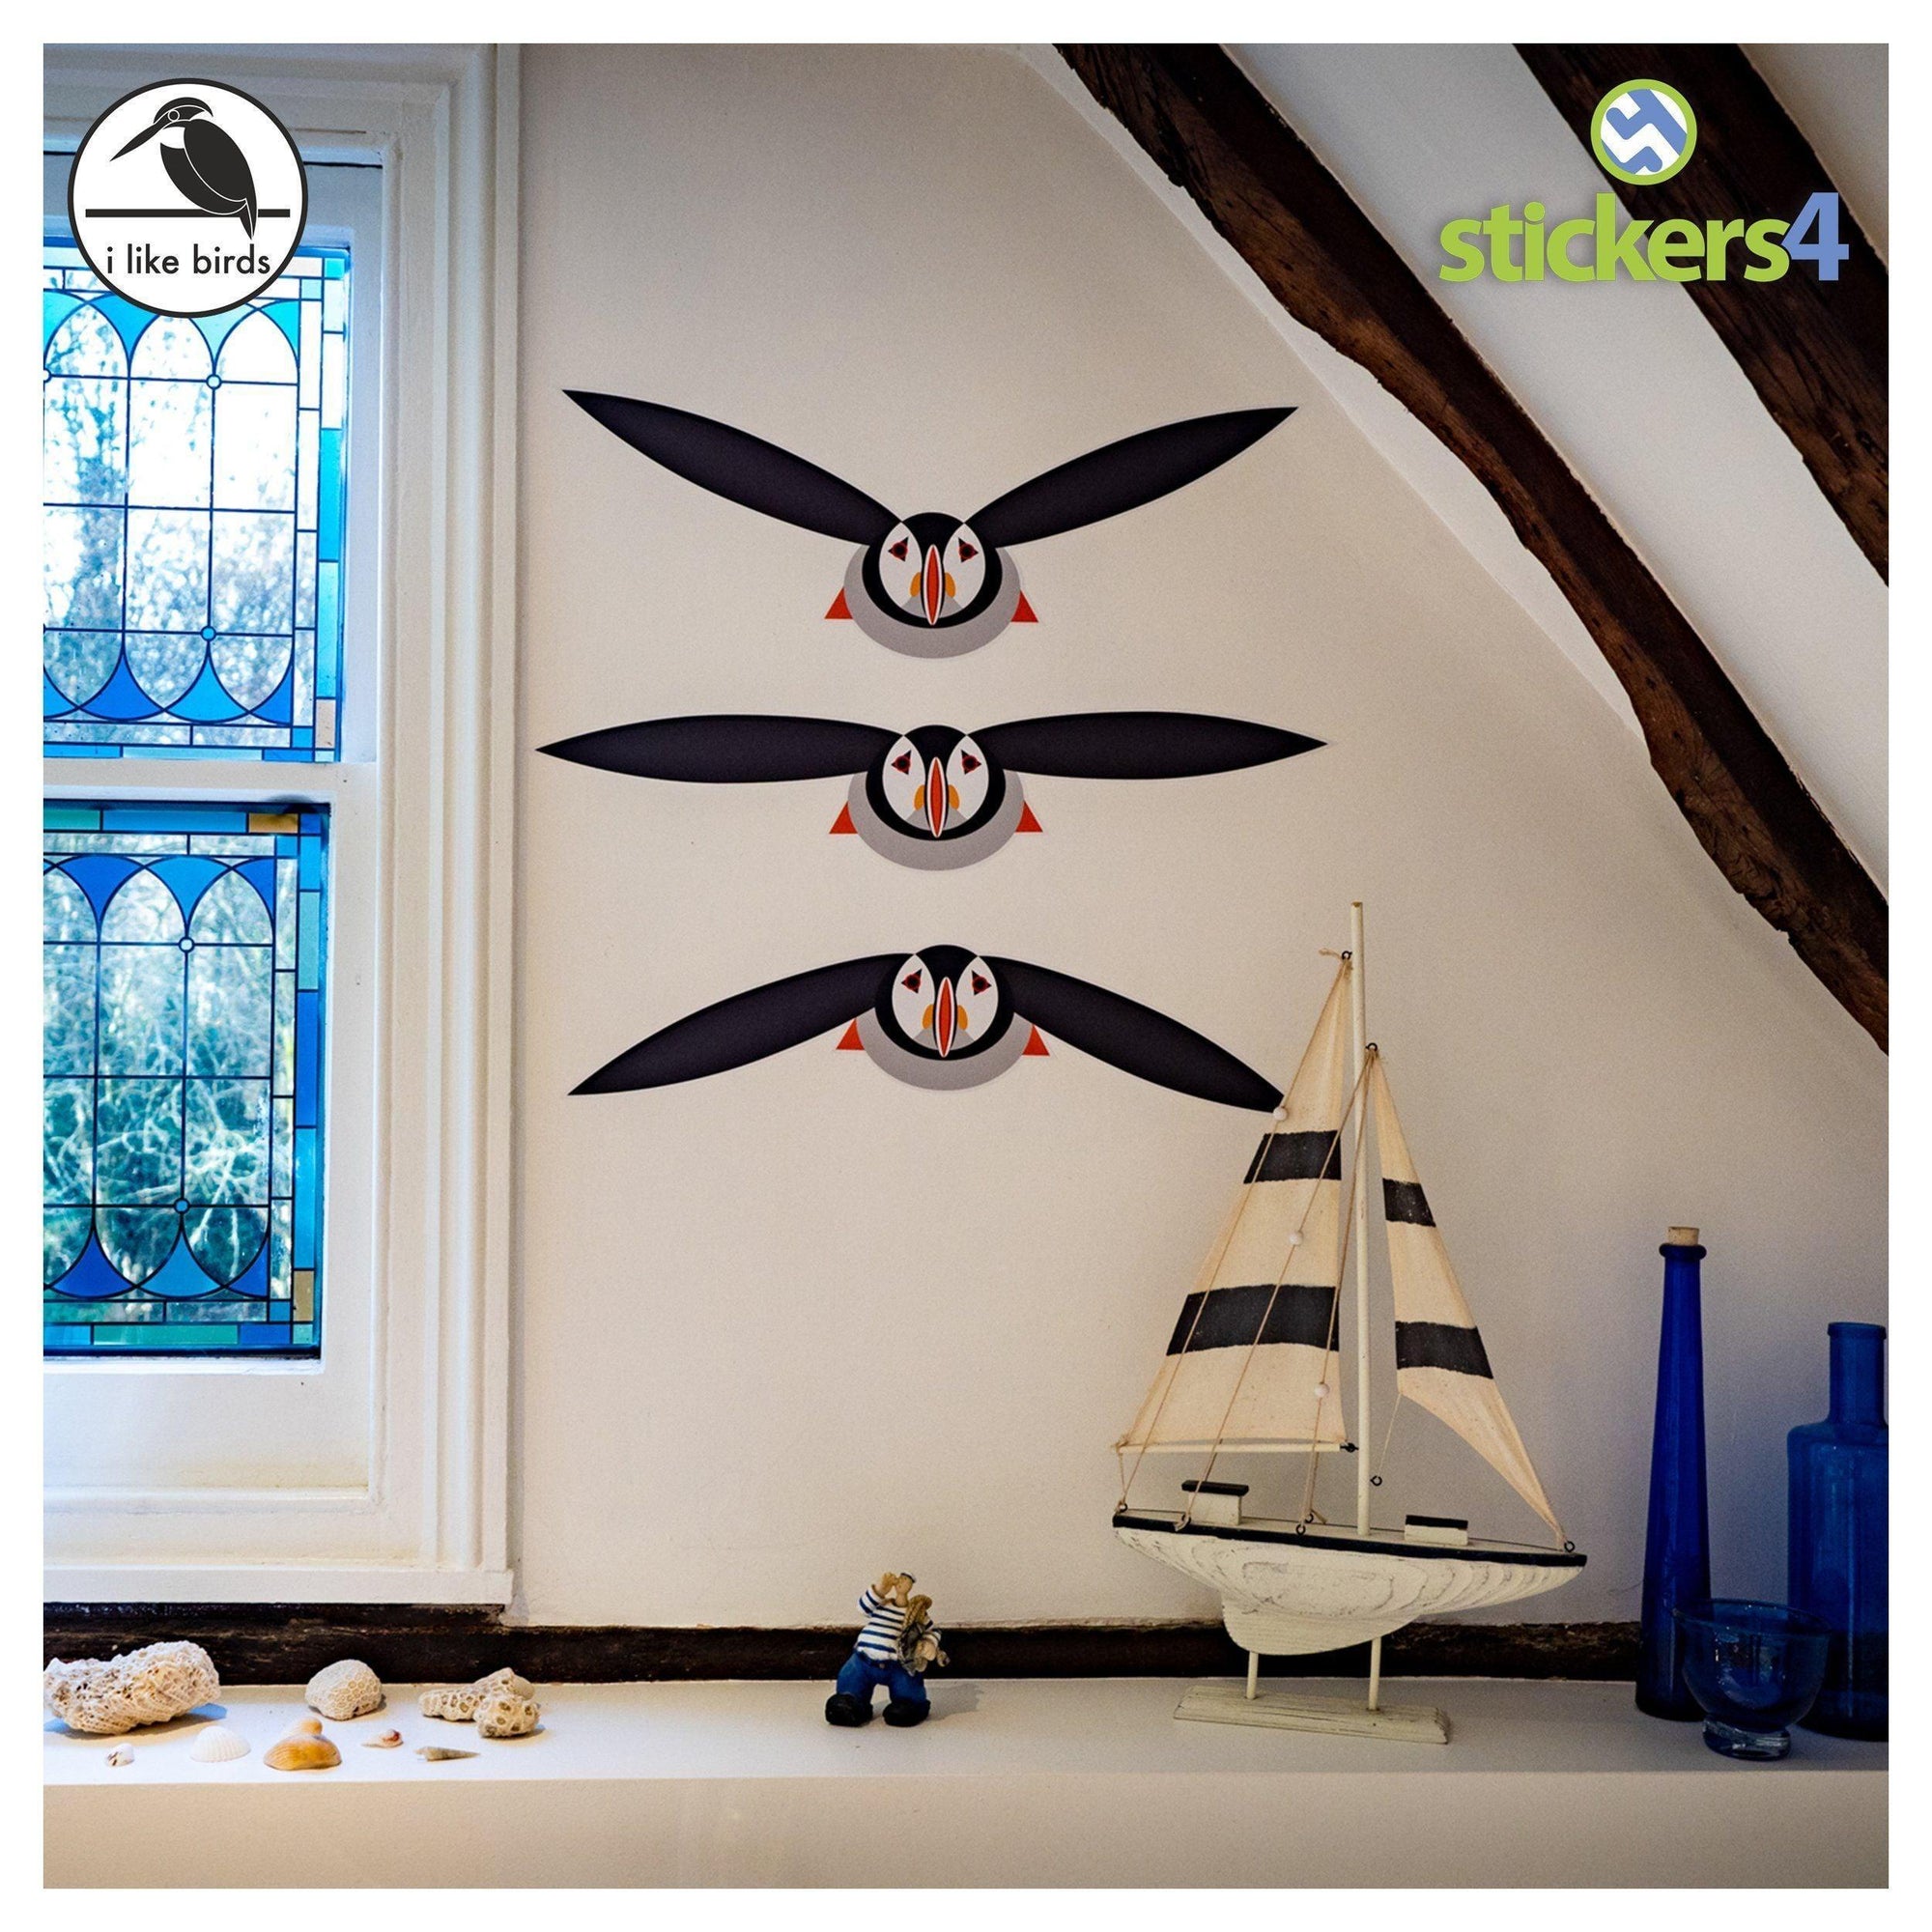 Flying Puffin Wall Stickers I Like Birds